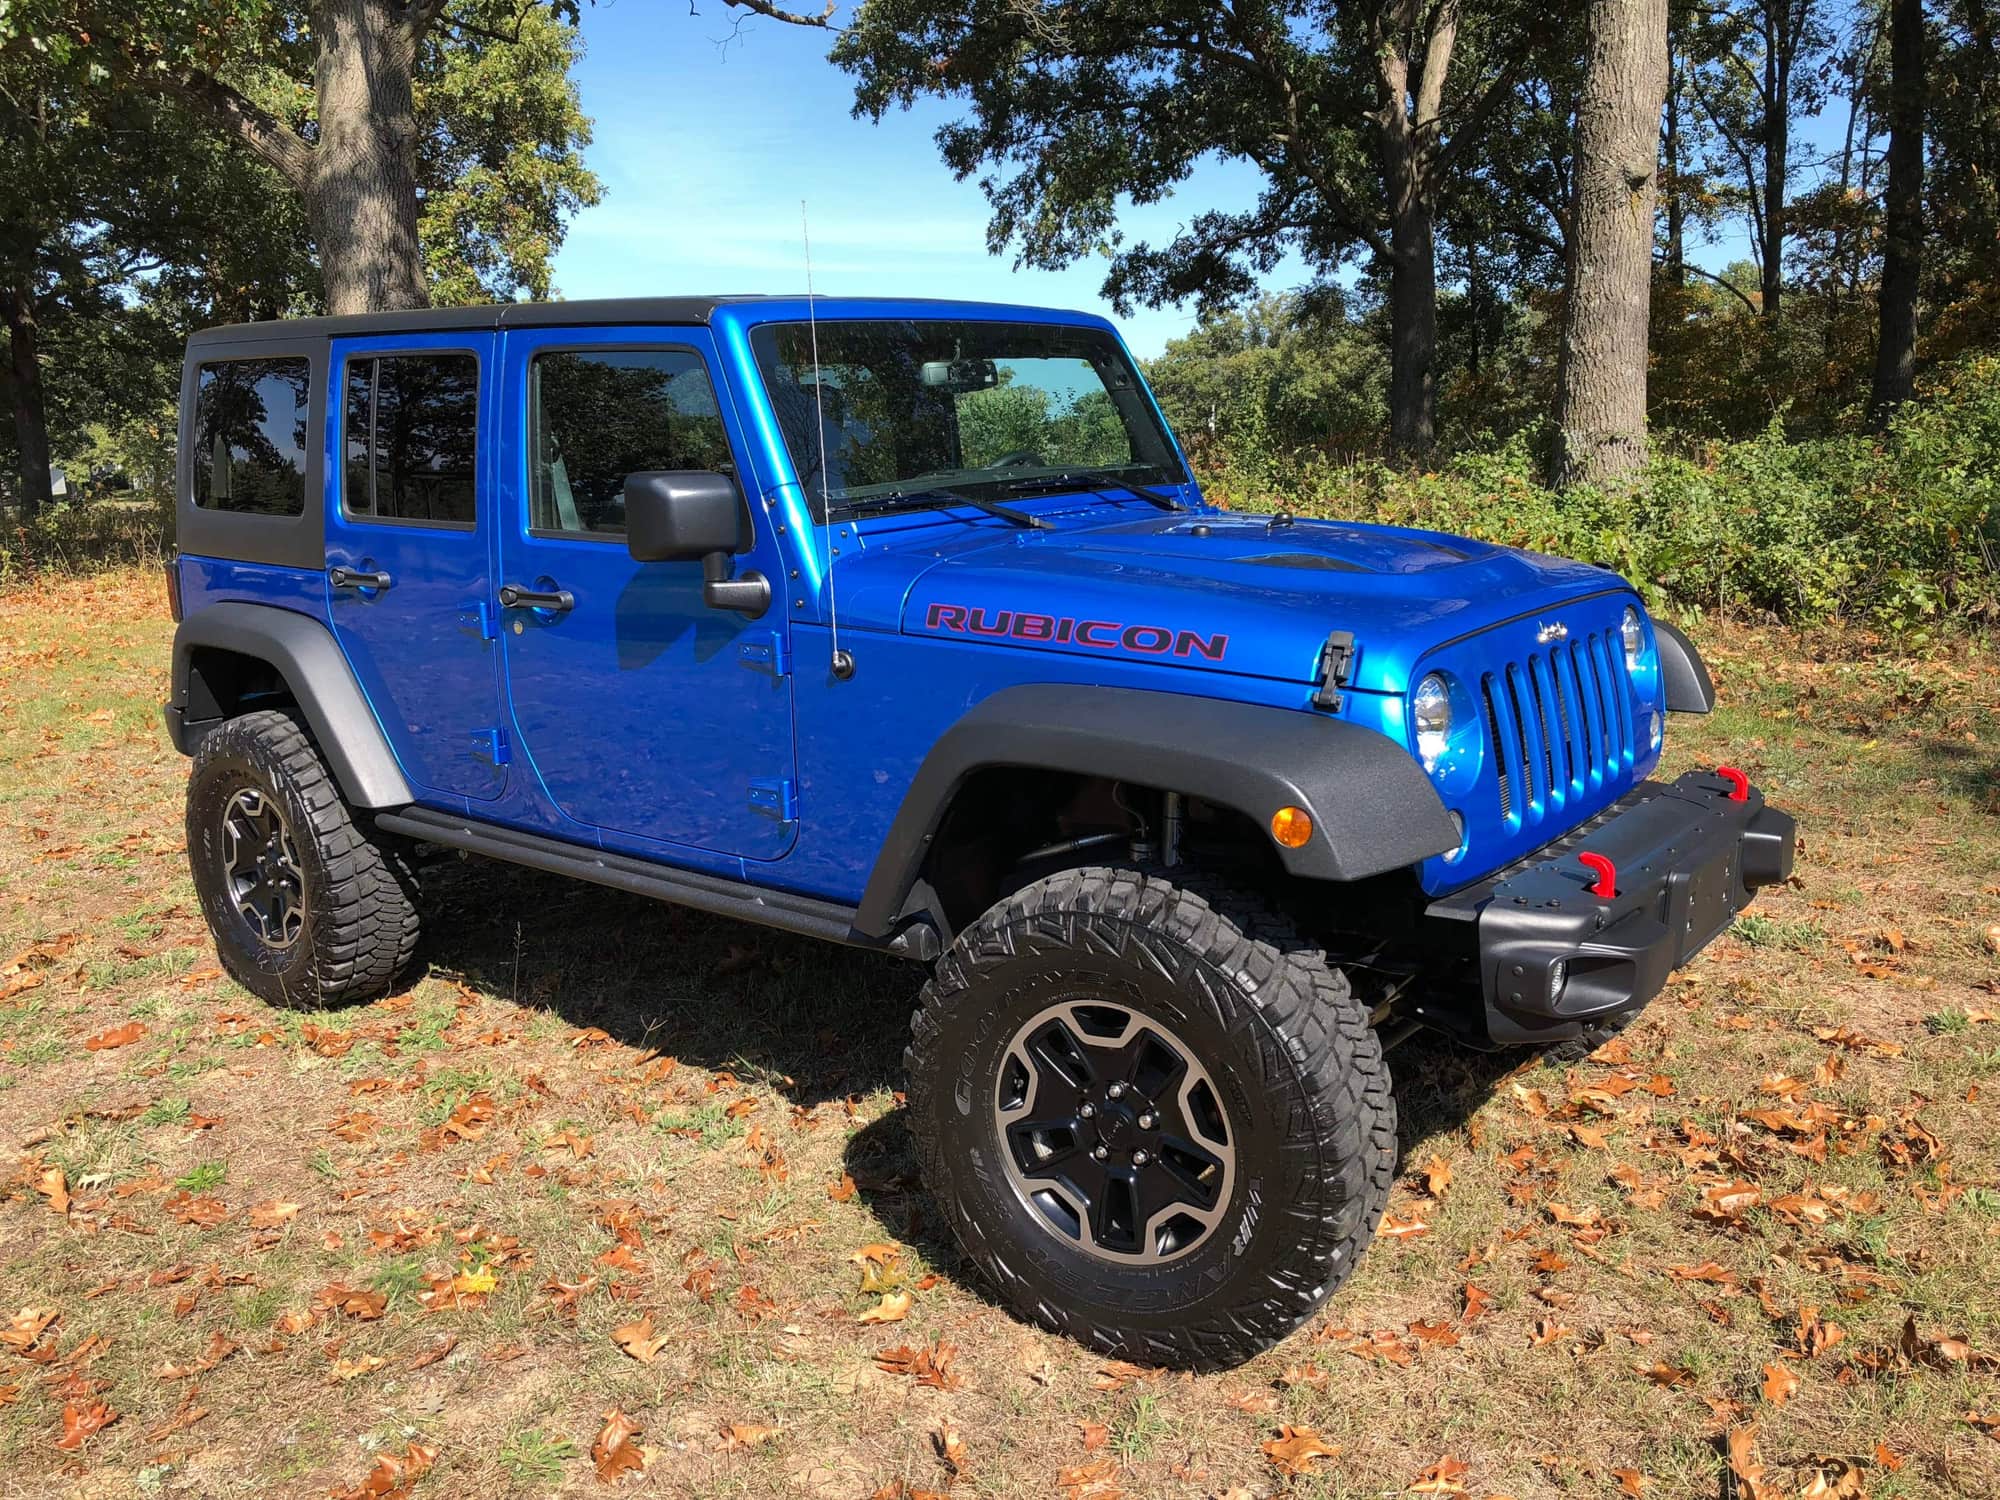 2016 Jeep Wrangler - FS: 2016 JK Hard Rock Rubicon 16k miles - Used - VIN 1C4HJWFG9GL170339 - 16,337 Miles - 6 cyl - 4WD - Automatic - Blue - Wheatfield, IN 46392, United States